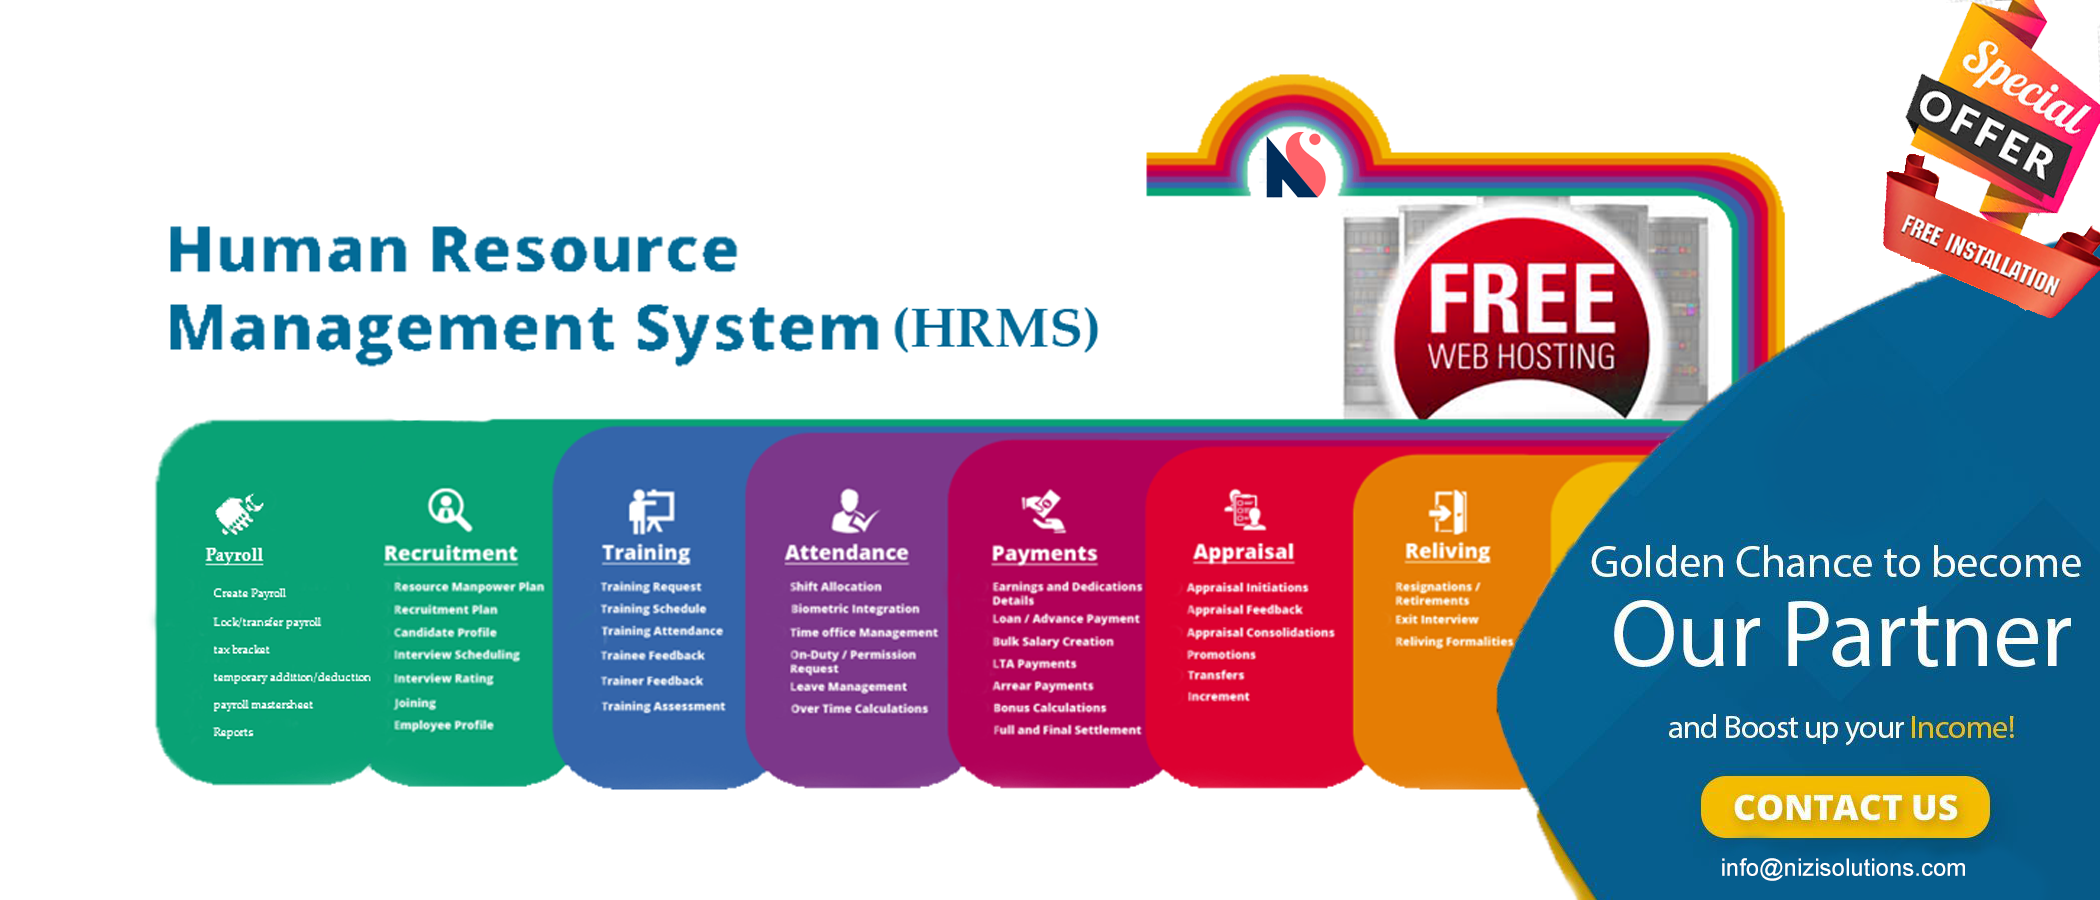 Human Resource Management System - HRMS Software